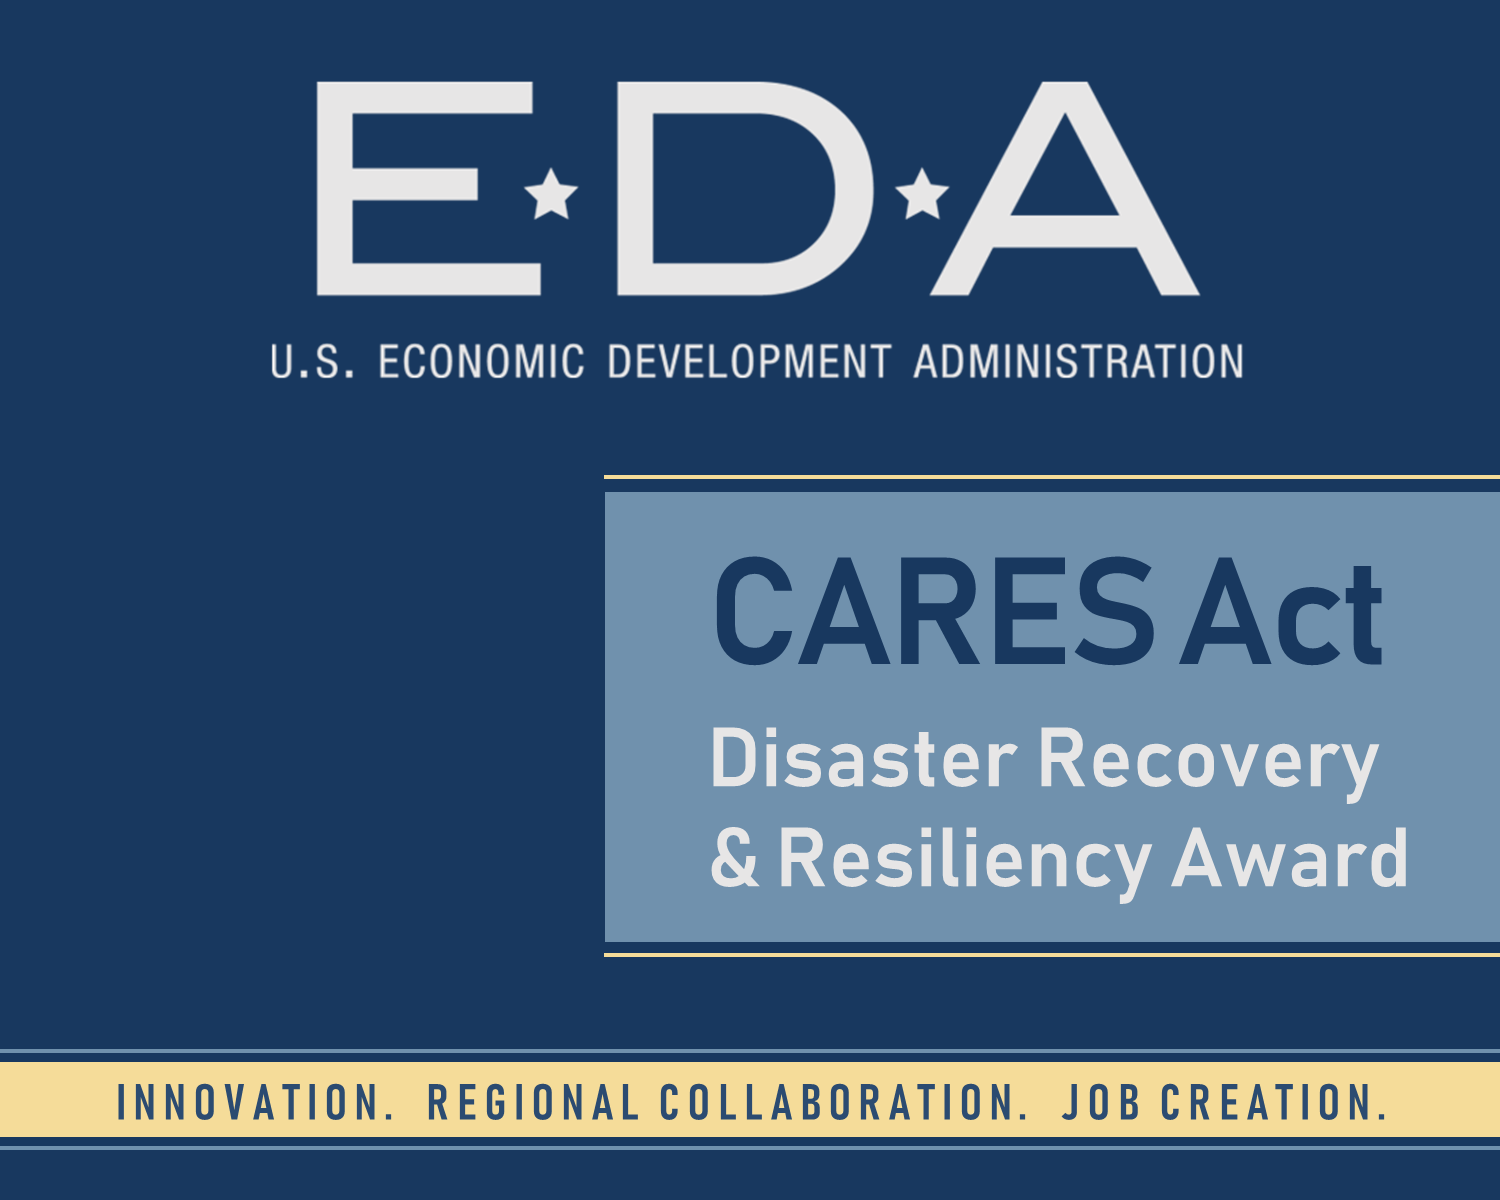 Image: EDA CARES Act Disaster Recovery & Resilience Award.